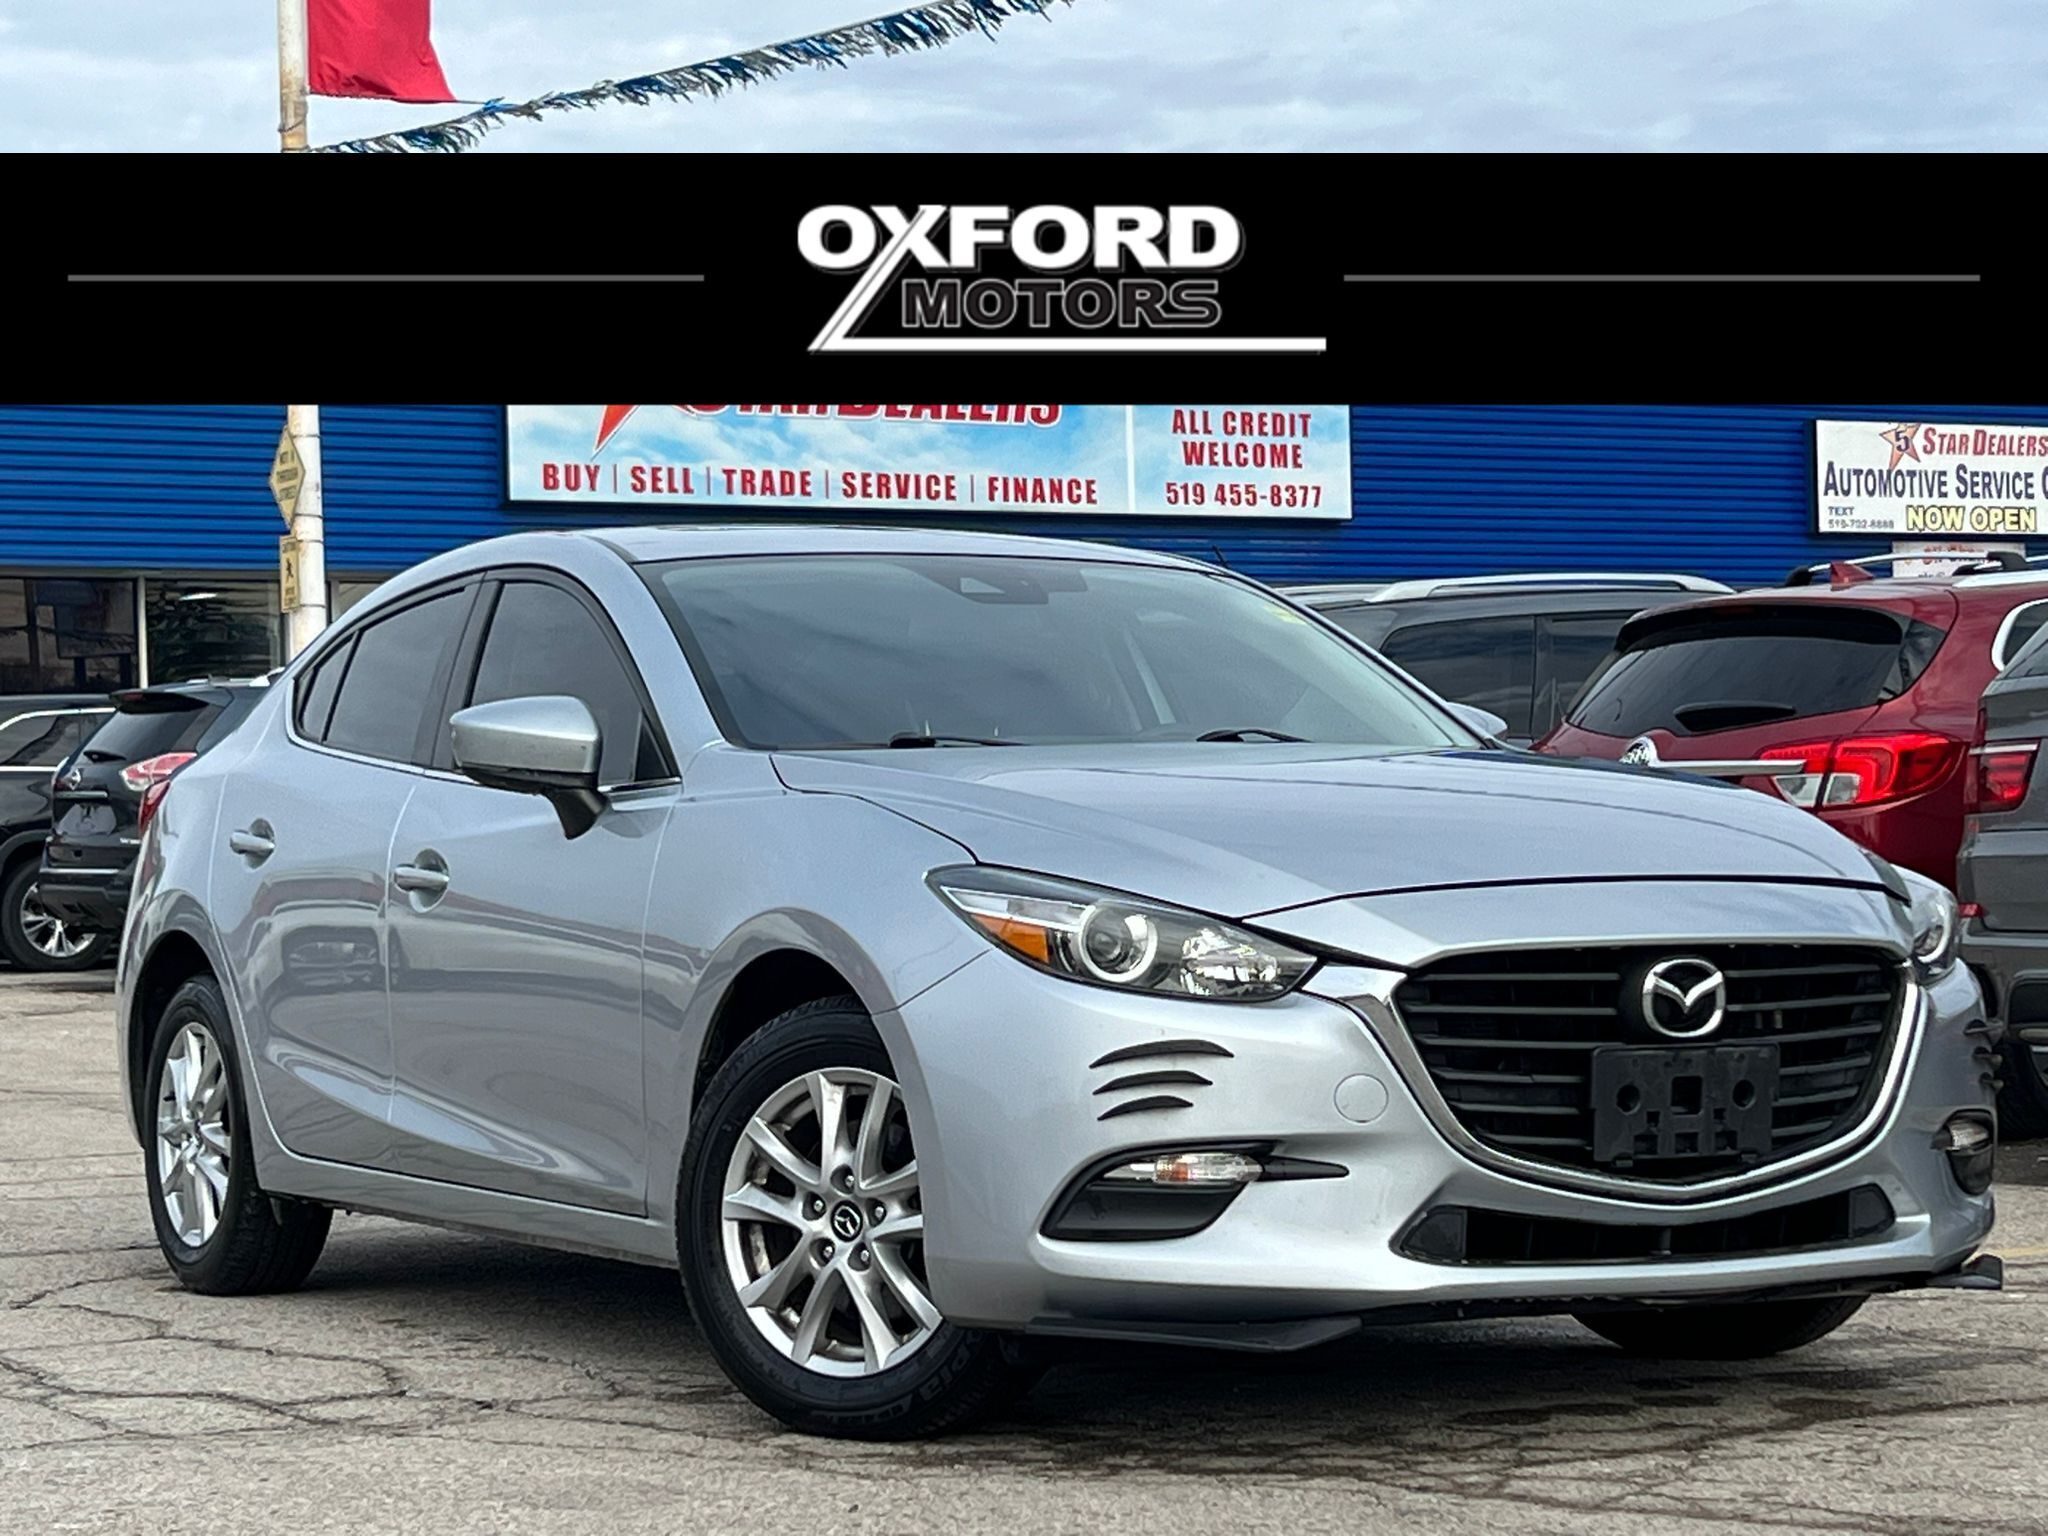 2018 Mazda Mazda3 EXCELLENT CONDITION! LMINT! WE FINANCE ALL CREDIT